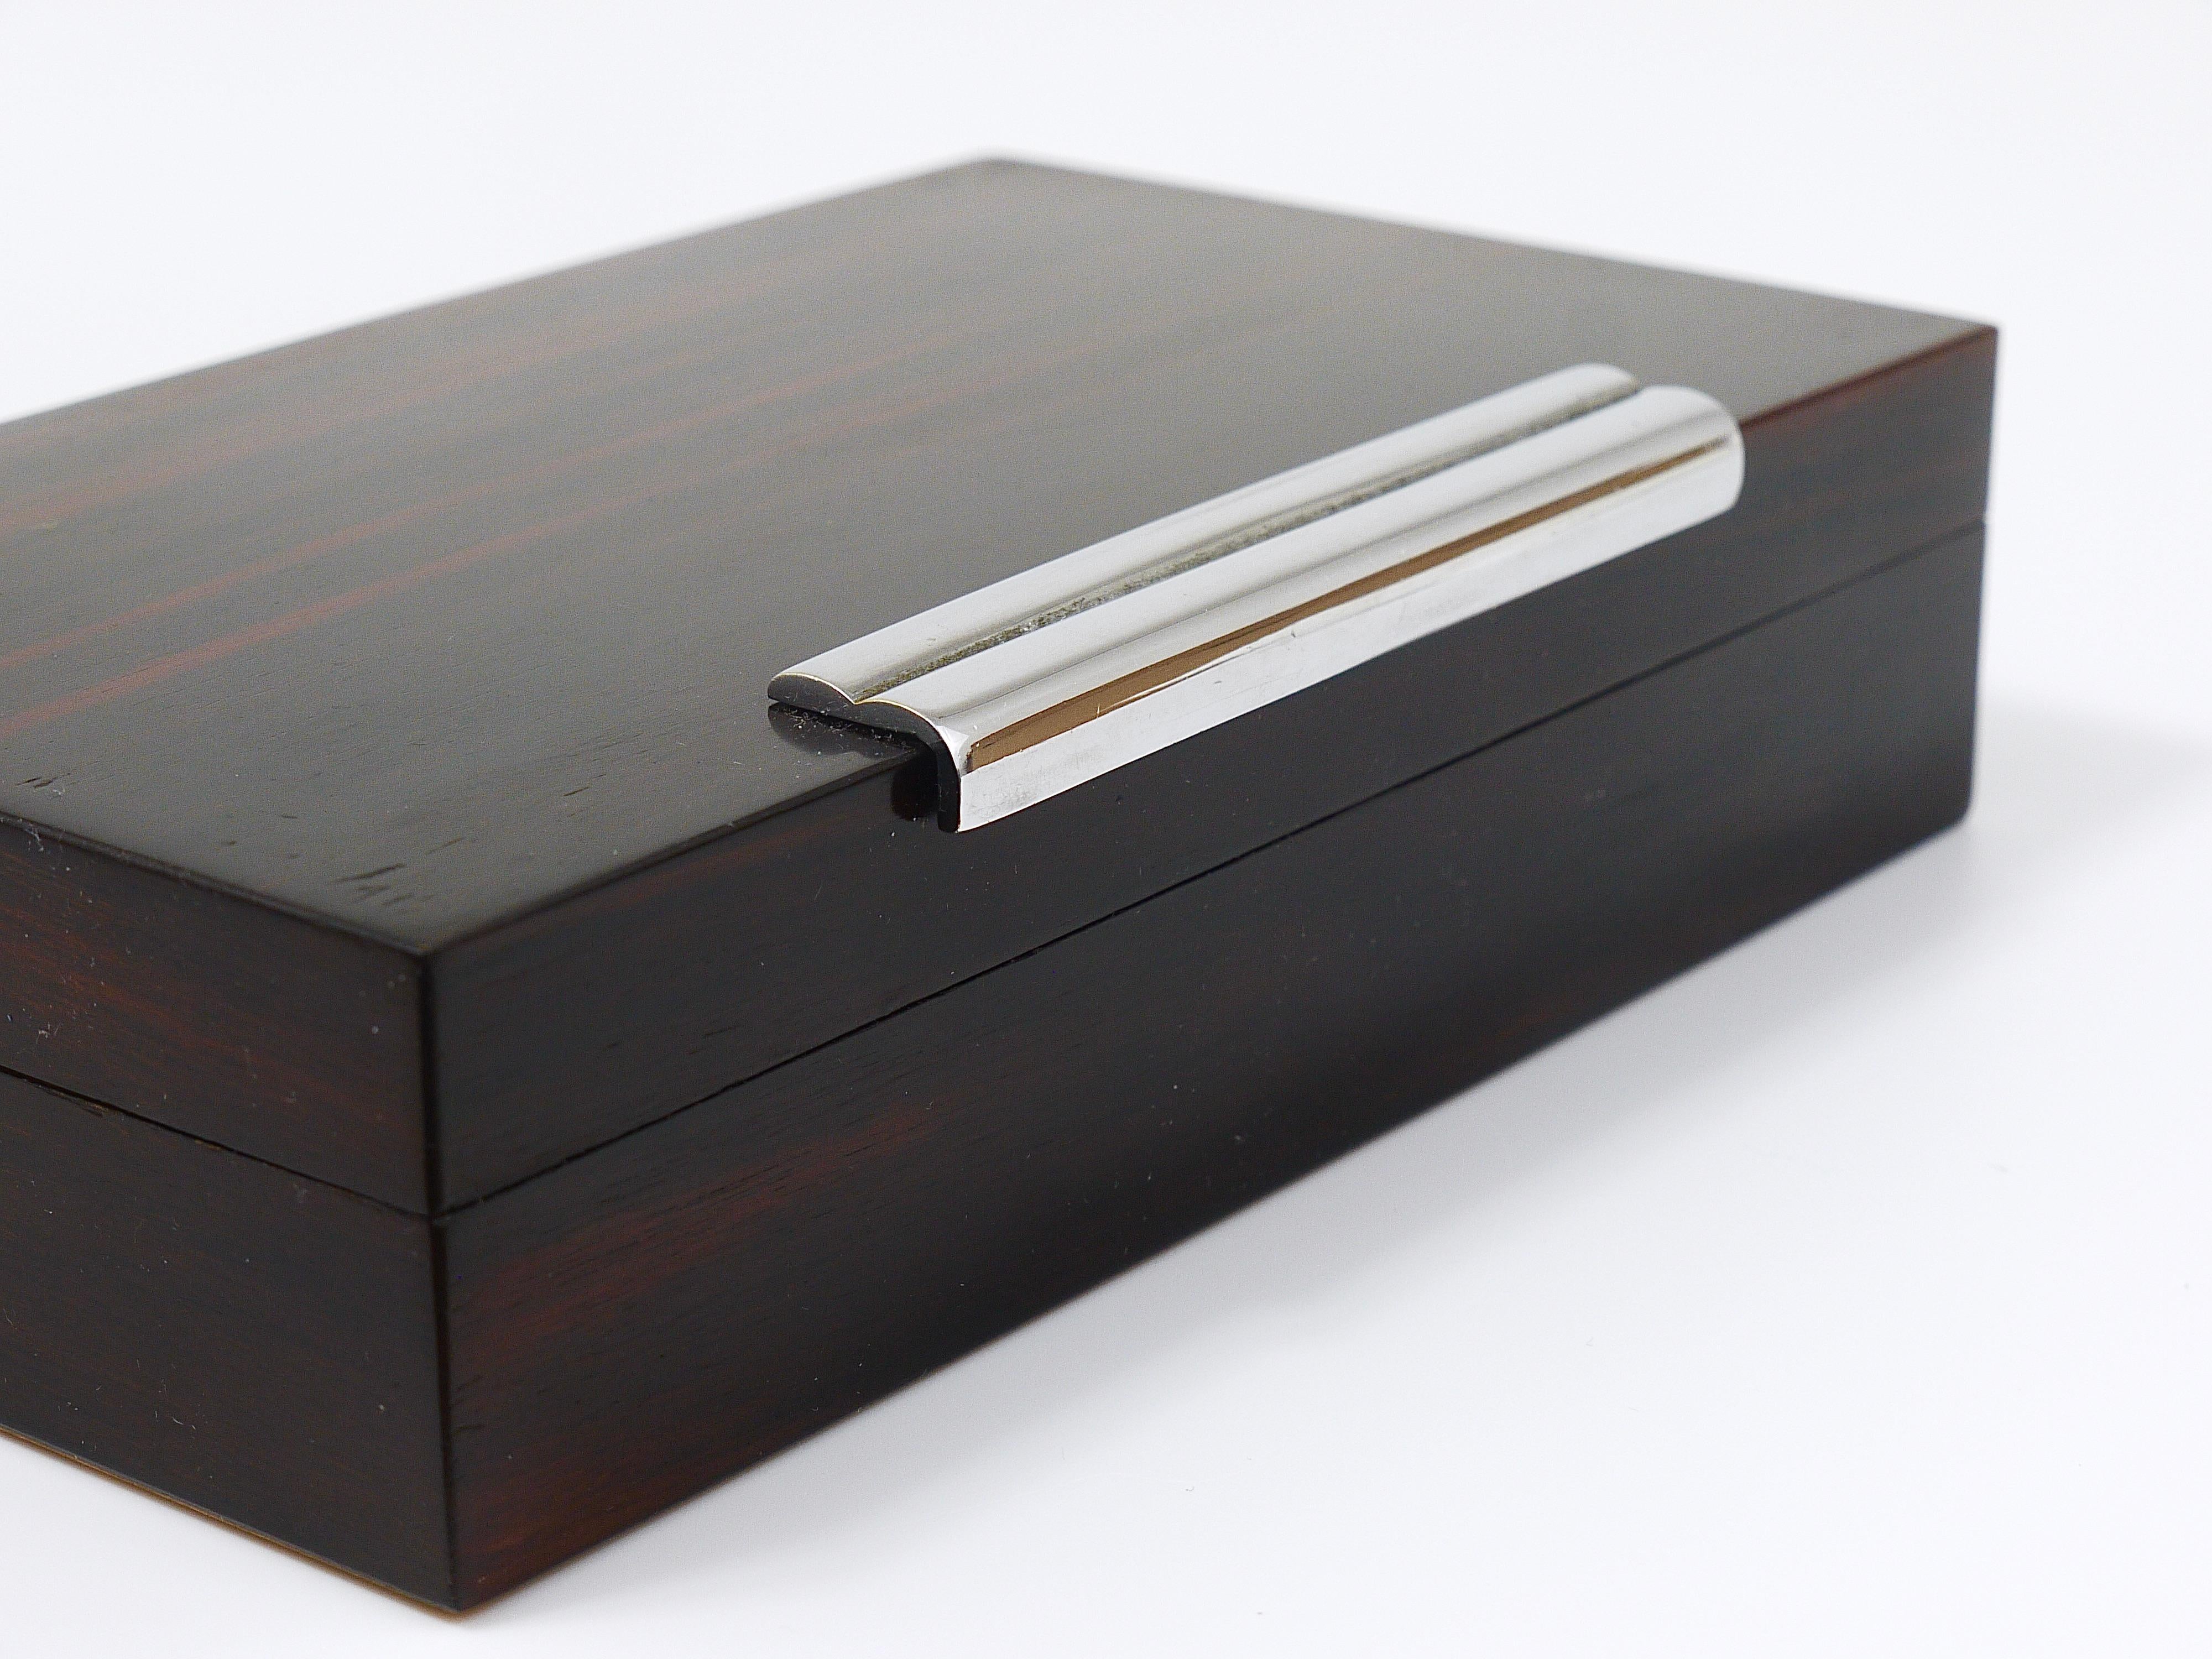 French Art Deco Rosewood & Nickel Storage Box, Maison Desny Style, France, 1930s For Sale 15